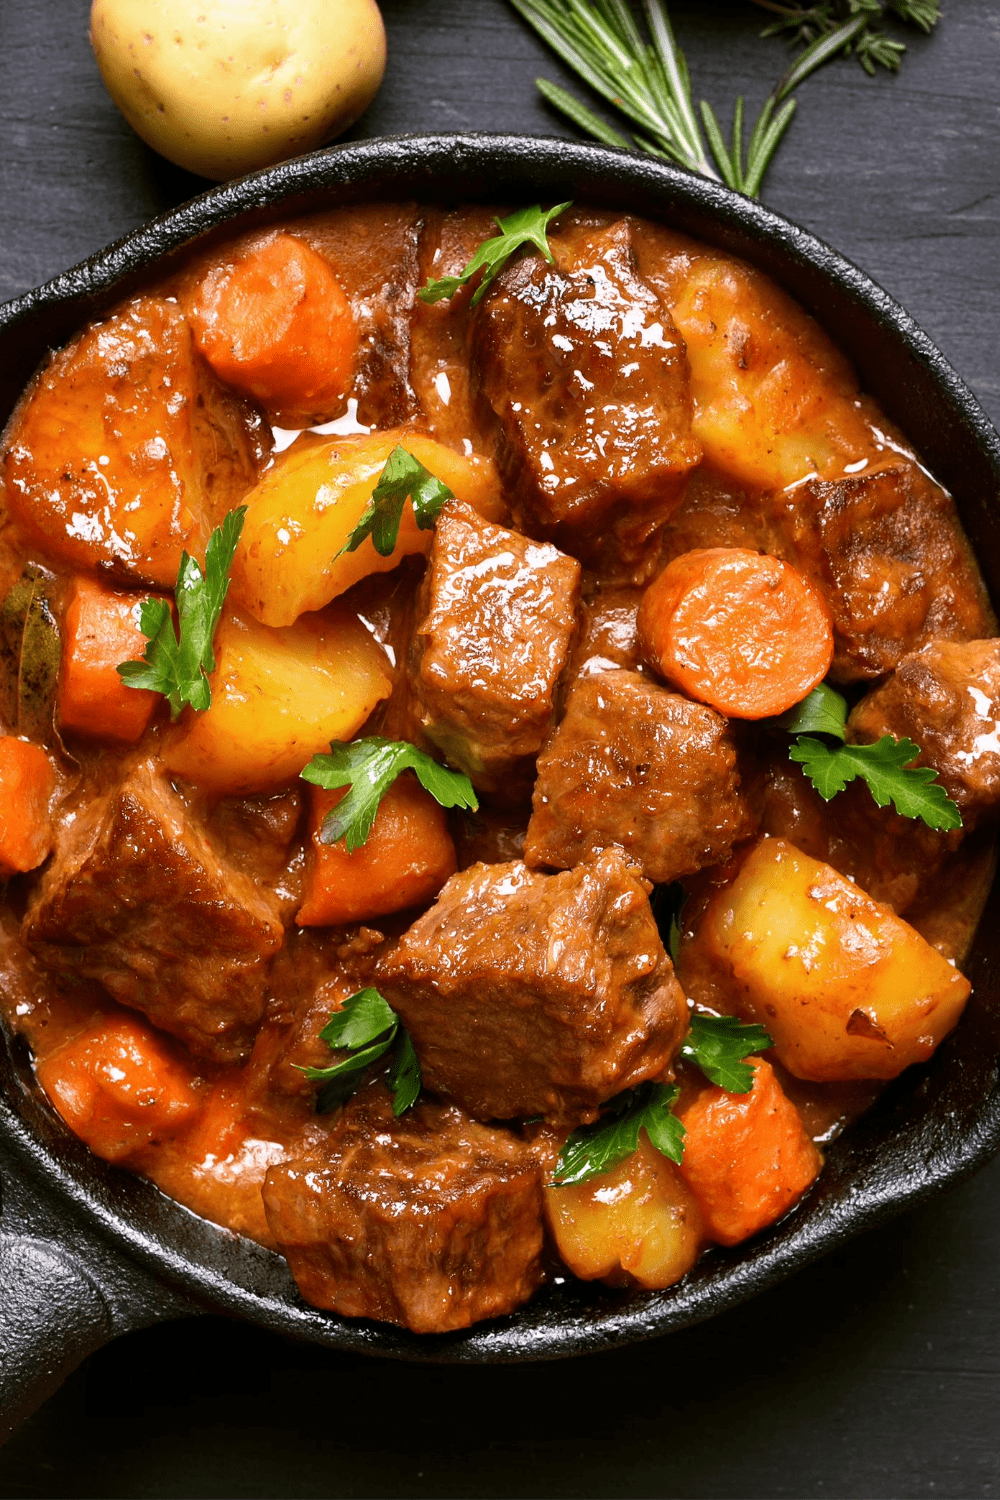 Beef Stew with carrots and potatoes on cast iron, garnished with cilantro leaves